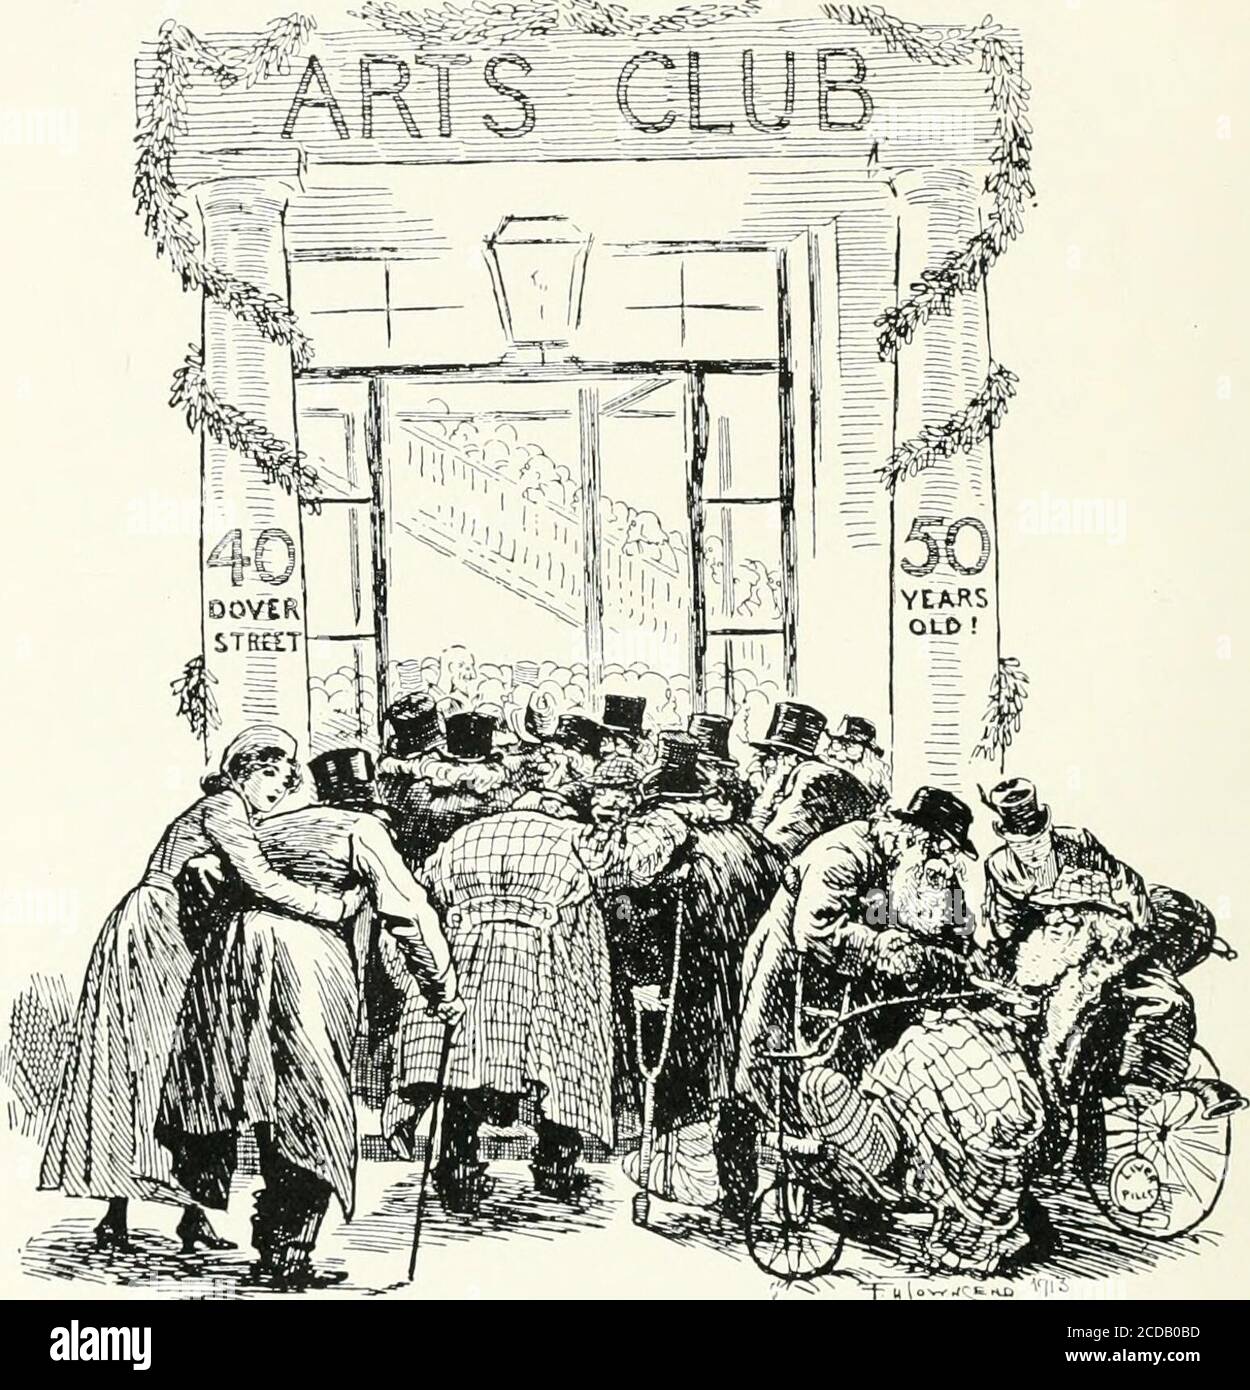 . The Arts Club and its members . 0 interest in the scheme appears to have waned, and very fewadditional volumes were acquired for many years. After the Clubmoved into its new house the books seem to have been huddled awayinto any odd corners not wanted for other purposes. At length, in1907, some enterprising members suggested that for the convenienceof those who had literary tastes the small drawing room might be fittedup with bookshelves and used as a library. The members of the ArtsClub, though many of them hold very Radical views on various sub-jects—notably on Art—are Conservative to the Stock Photo